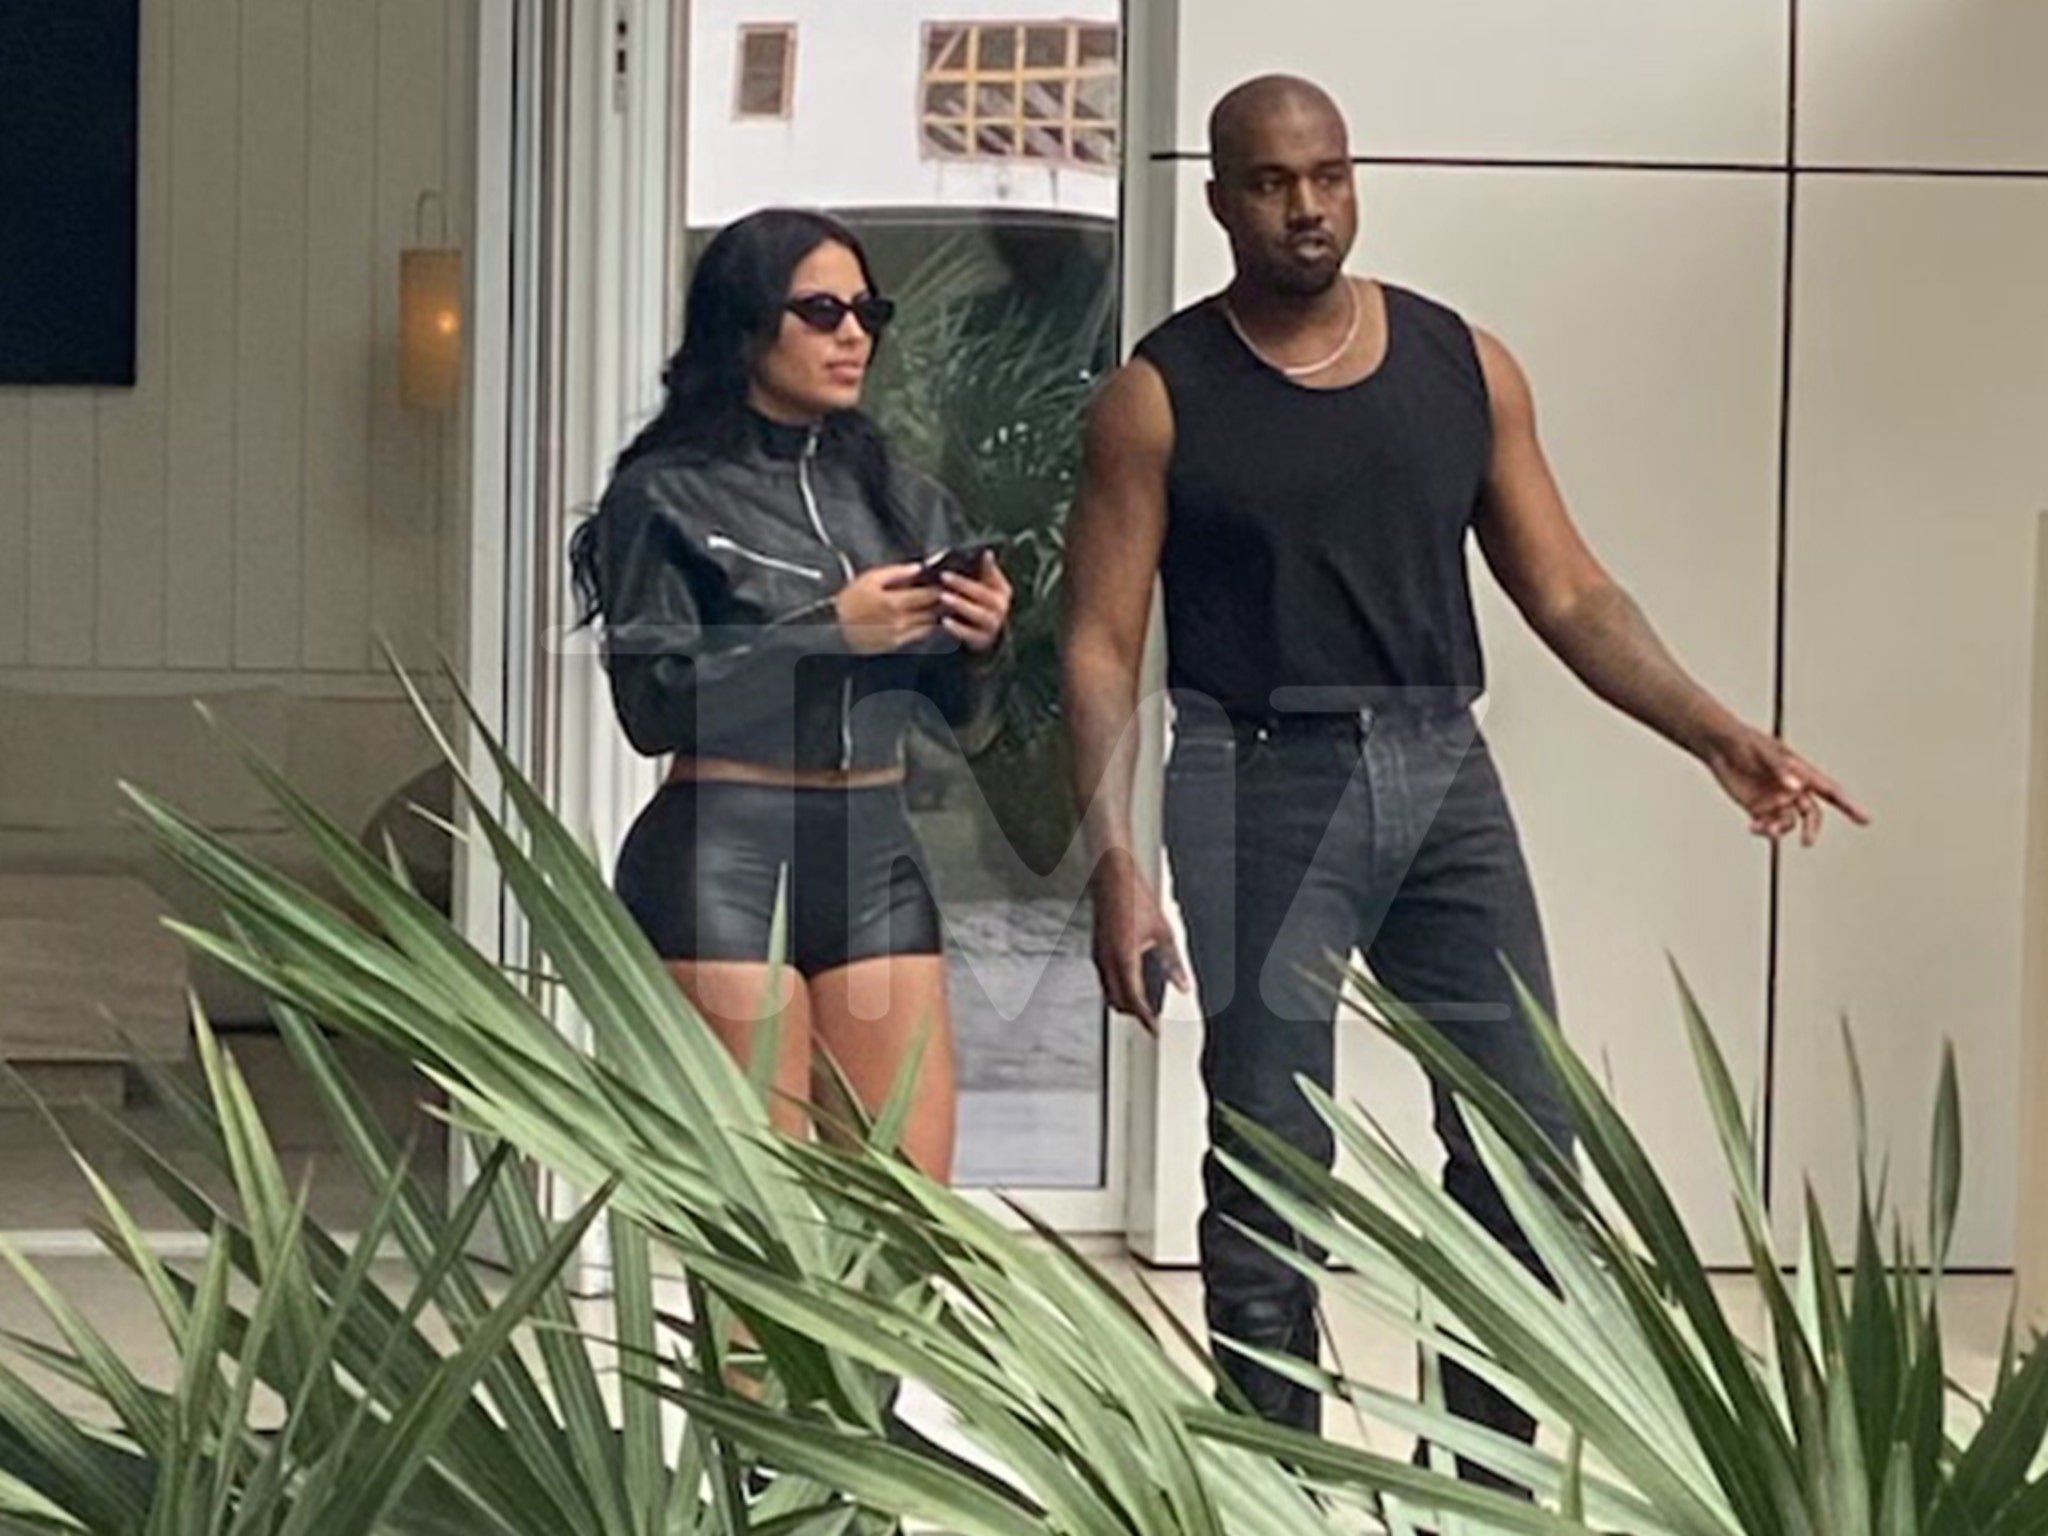 Kanye West Spends Morning in Miami with Kim K Look-Alike Chaney Jones